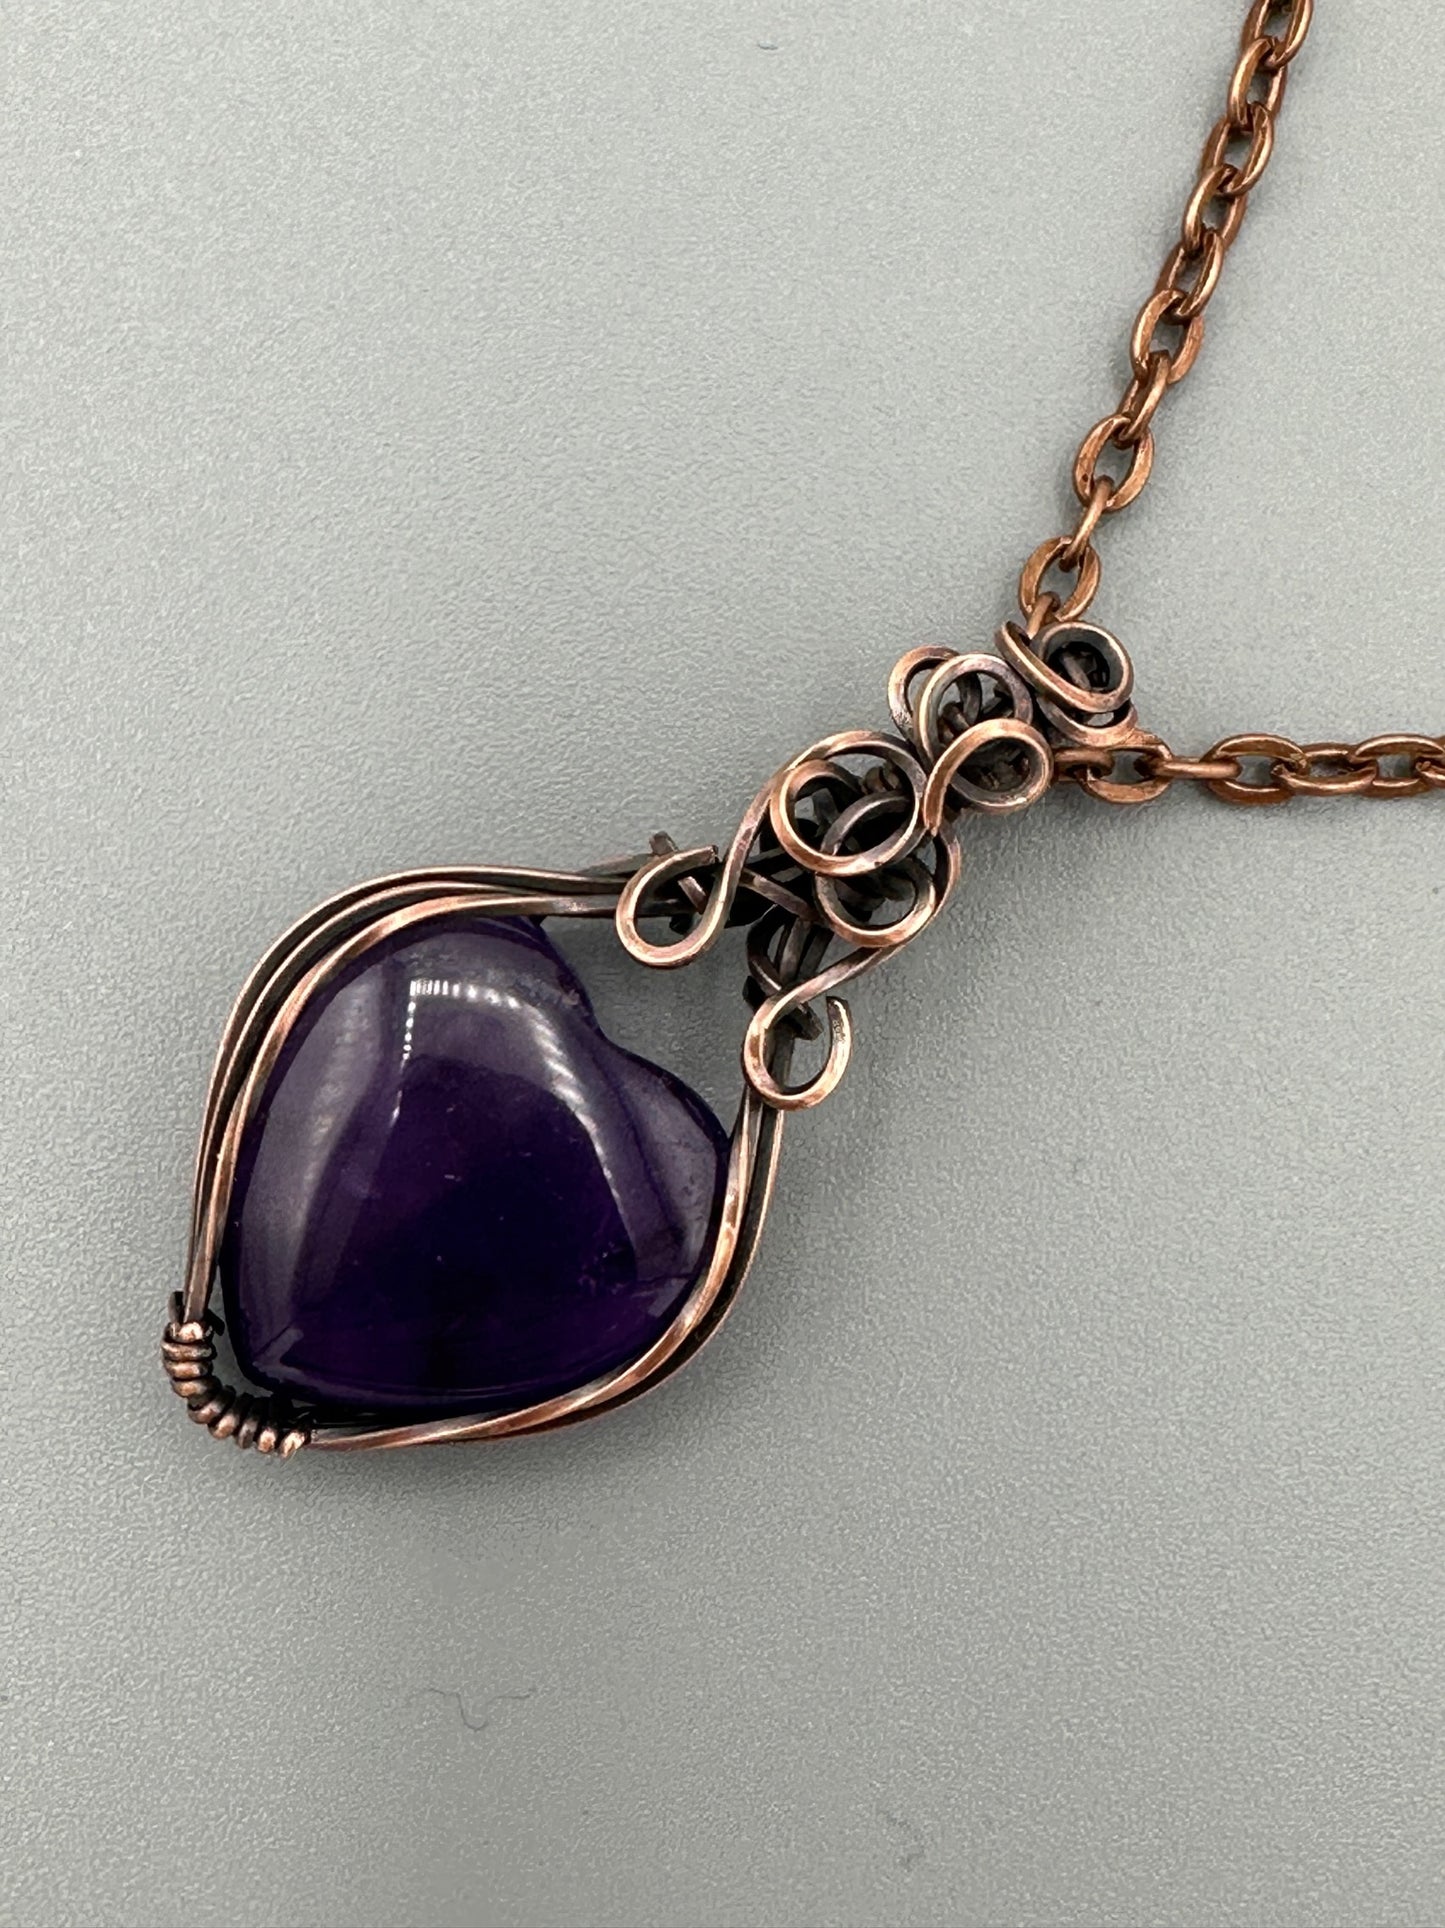 Handmade Wire Wrapped Amethyst Heart Pendant